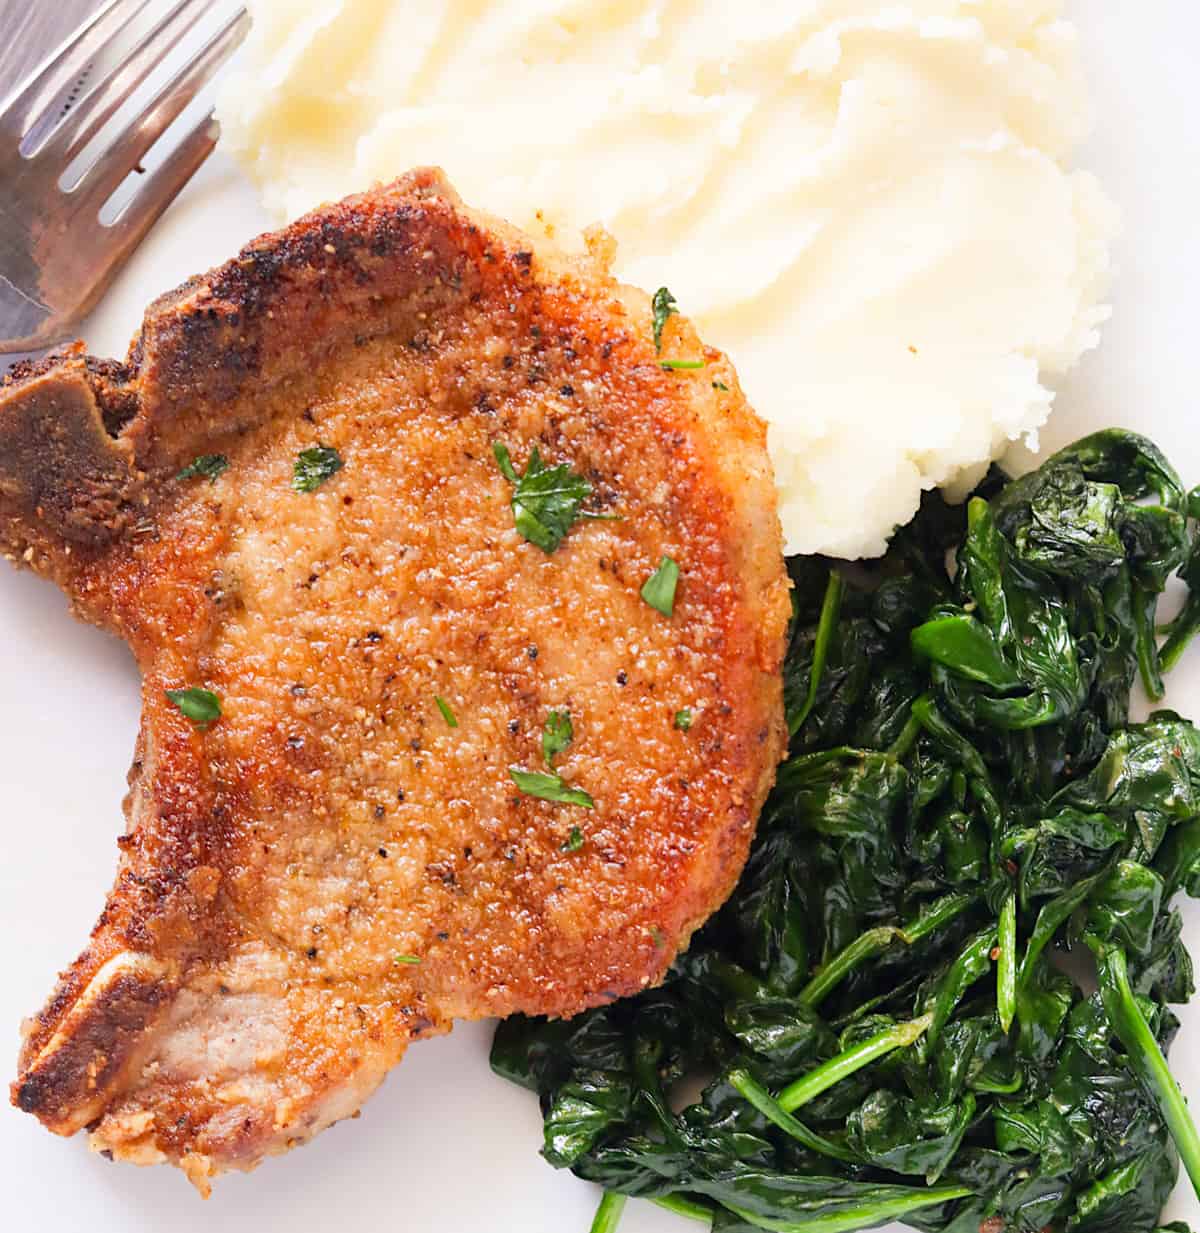 Fried pork chops with vegetables and mashed potatoes are great soul food